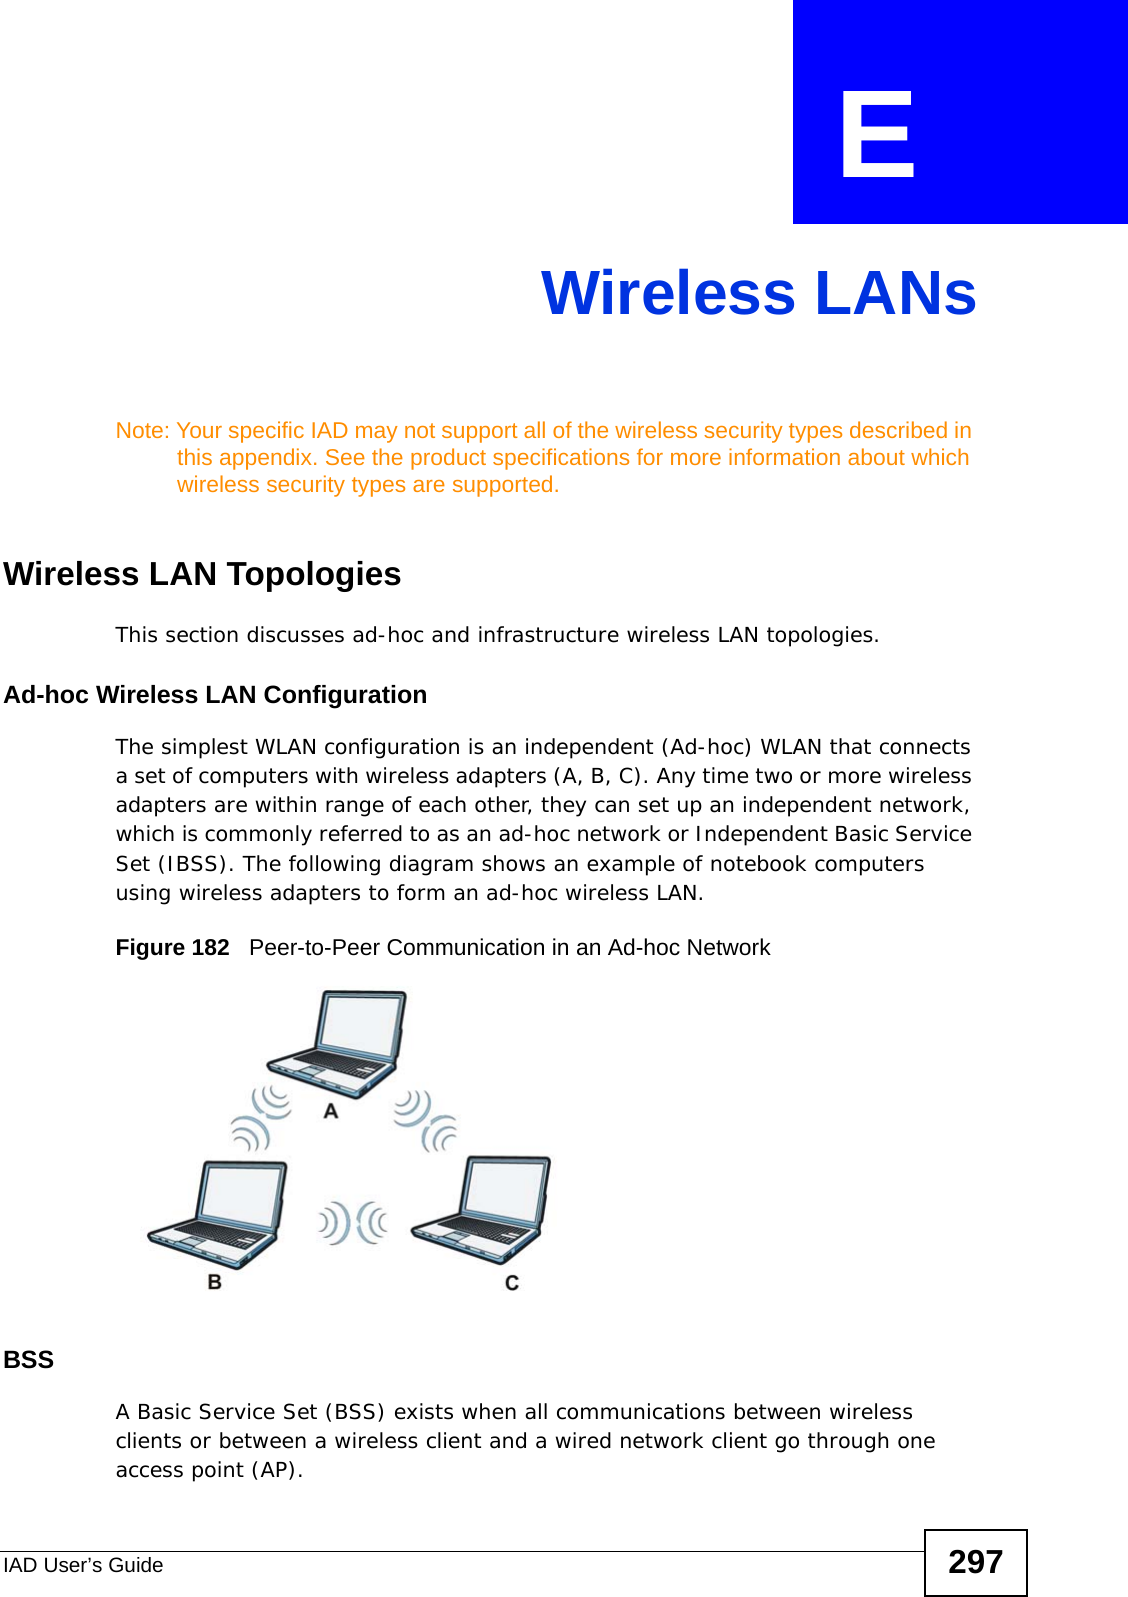 IAD User’s Guide 297APPENDIX  E Wireless LANsNote: Your specific IAD may not support all of the wireless security types described in this appendix. See the product specifications for more information about which wireless security types are supported.Wireless LAN TopologiesThis section discusses ad-hoc and infrastructure wireless LAN topologies.Ad-hoc Wireless LAN ConfigurationThe simplest WLAN configuration is an independent (Ad-hoc) WLAN that connects a set of computers with wireless adapters (A, B, C). Any time two or more wireless adapters are within range of each other, they can set up an independent network, which is commonly referred to as an ad-hoc network or Independent Basic Service Set (IBSS). The following diagram shows an example of notebook computers using wireless adapters to form an ad-hoc wireless LAN. Figure 182   Peer-to-Peer Communication in an Ad-hoc NetworkBSSA Basic Service Set (BSS) exists when all communications between wireless clients or between a wireless client and a wired network client go through one access point (AP). 